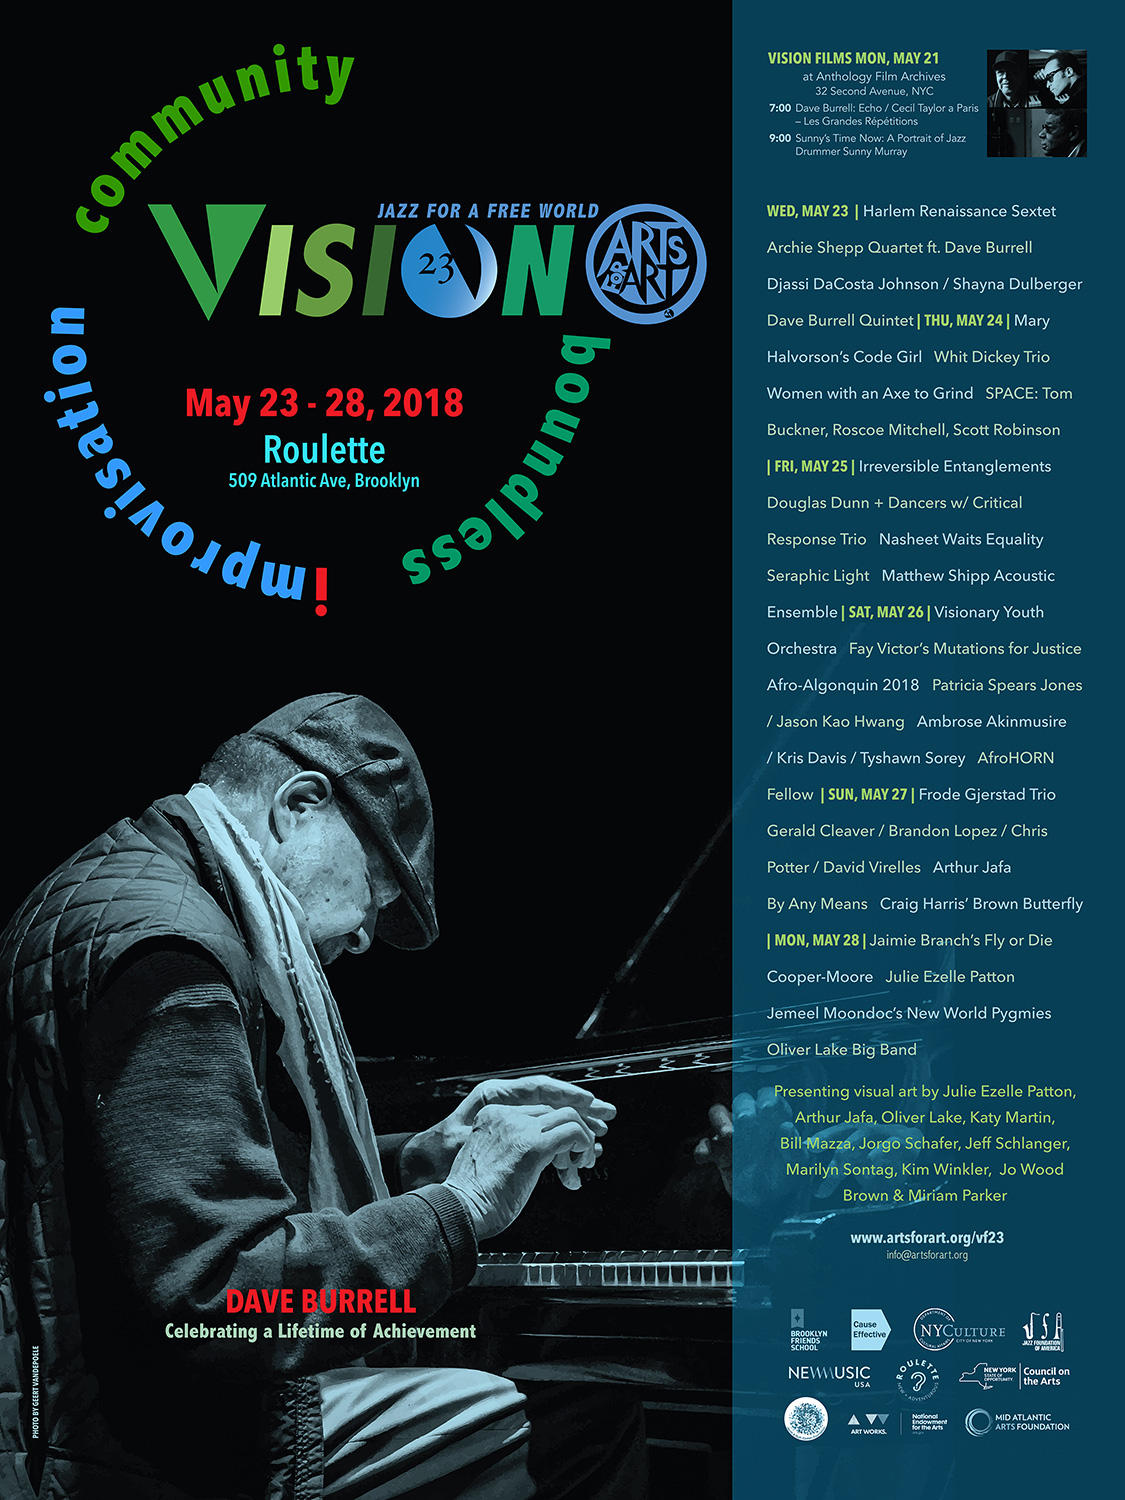 Vision 23 Poster featuring photograph of David Burrell and Vision 23 branding